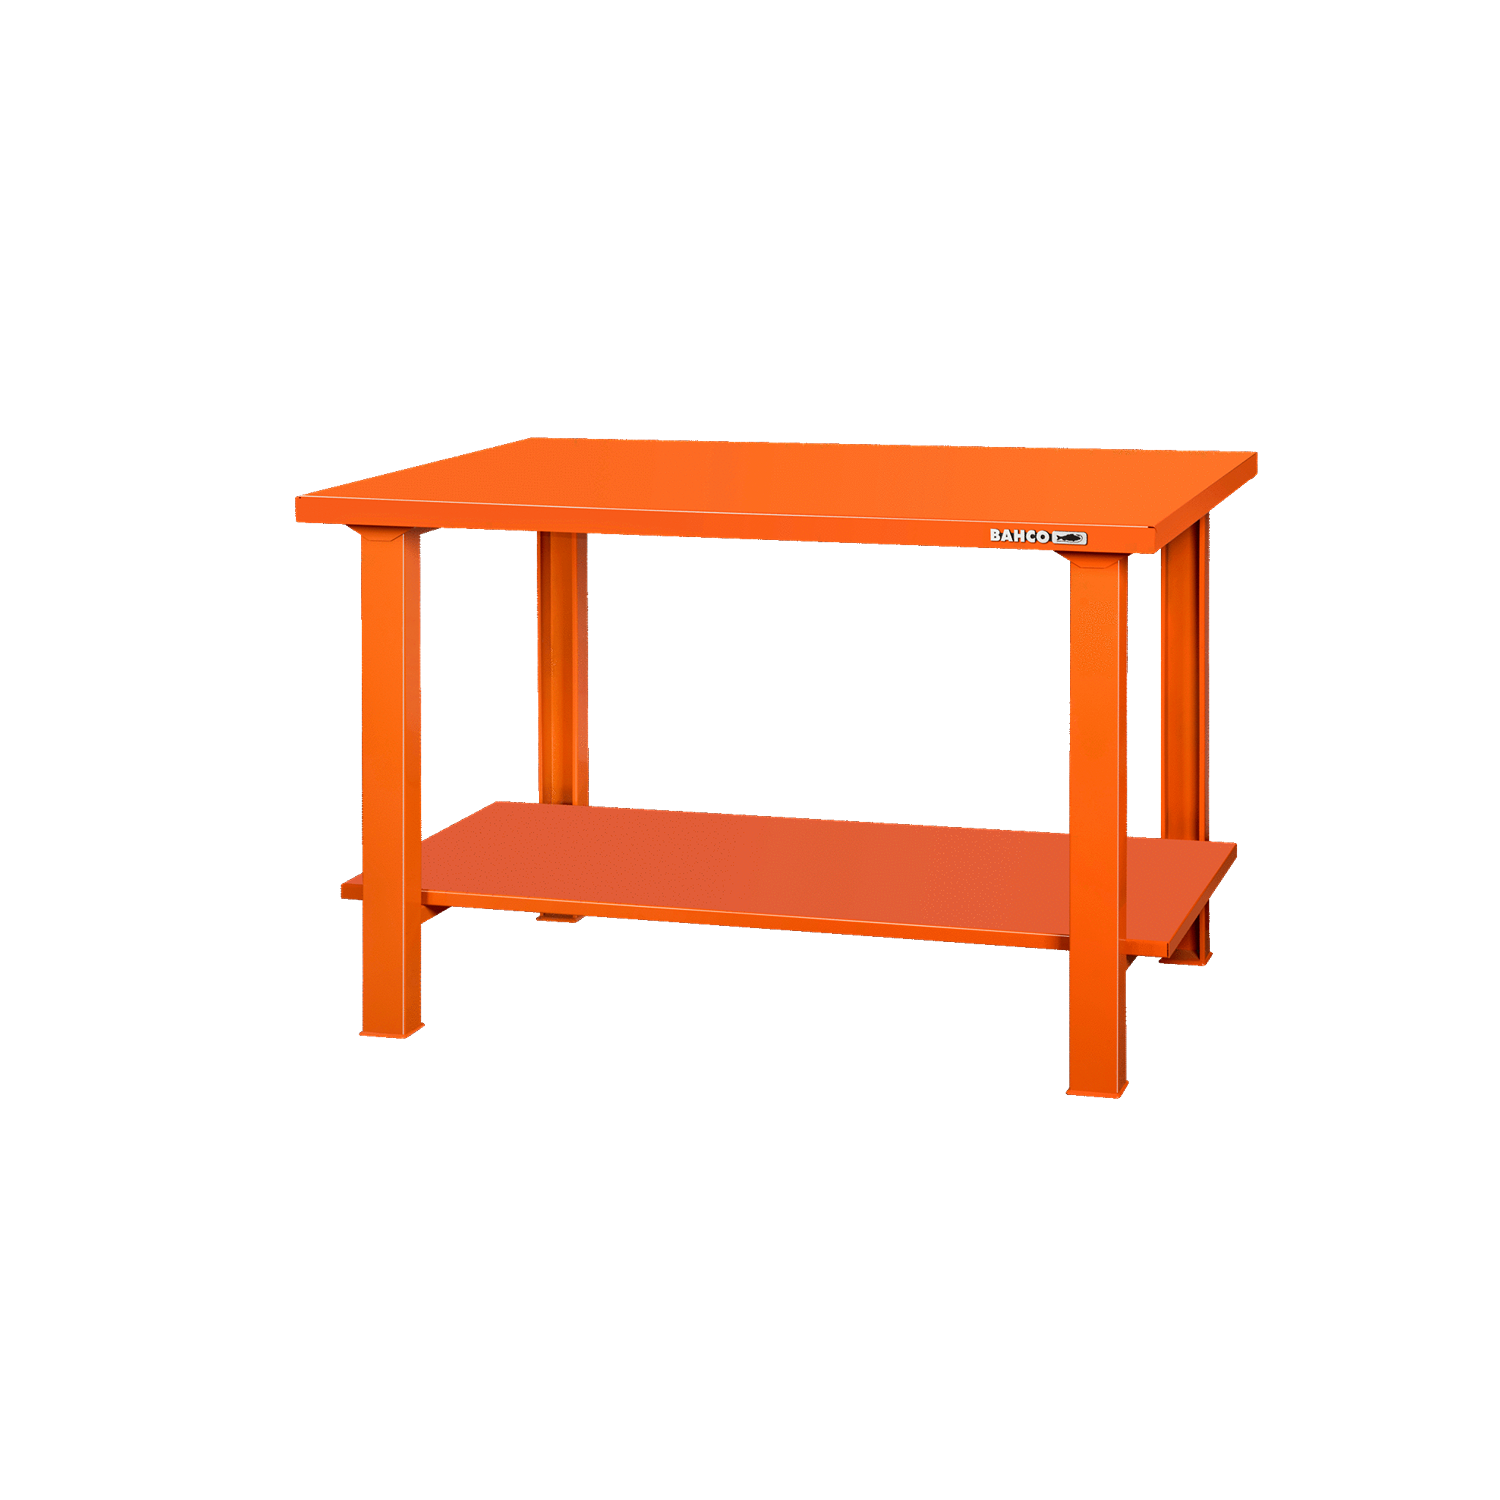 BAHCO 1495WB15TSBT Heavy Duty Steel Top Workbenches & Bottom Tray - Premium Steel Top Workbenches from BAHCO - Shop now at Yew Aik.